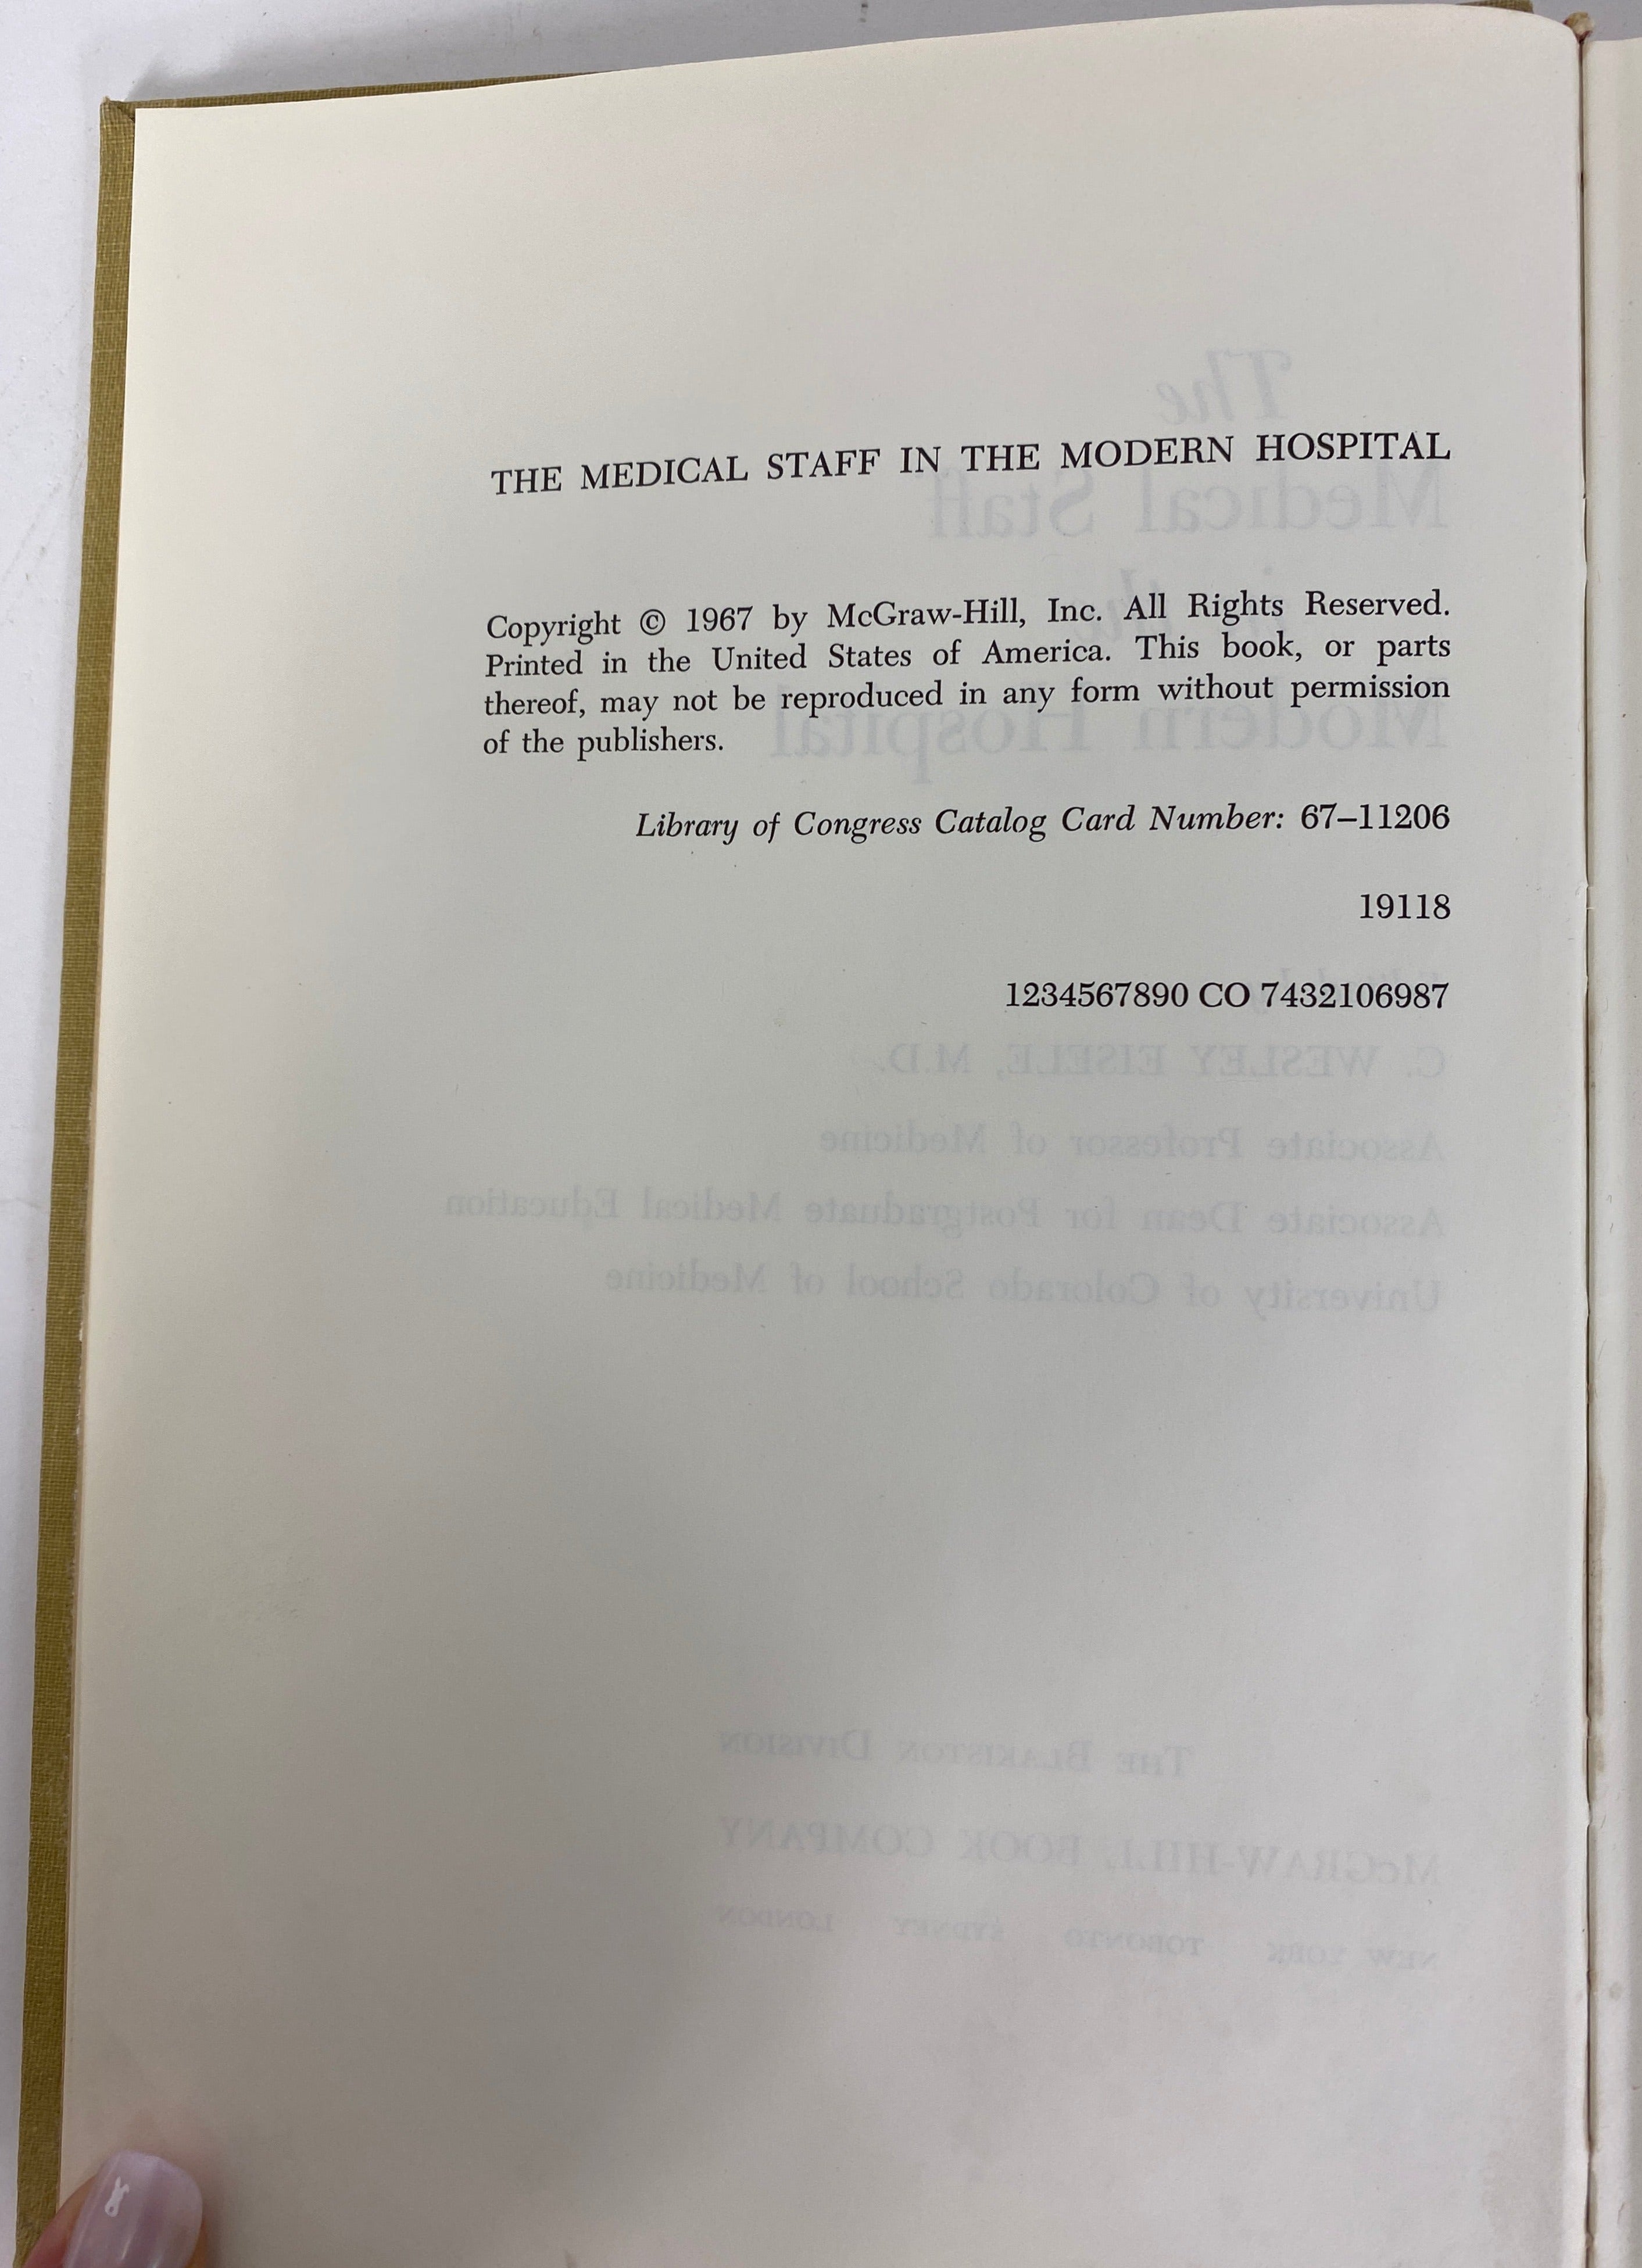 The Medical Staff in the Modern Hospital by C. Wesley Eisele 1967 HC DJ